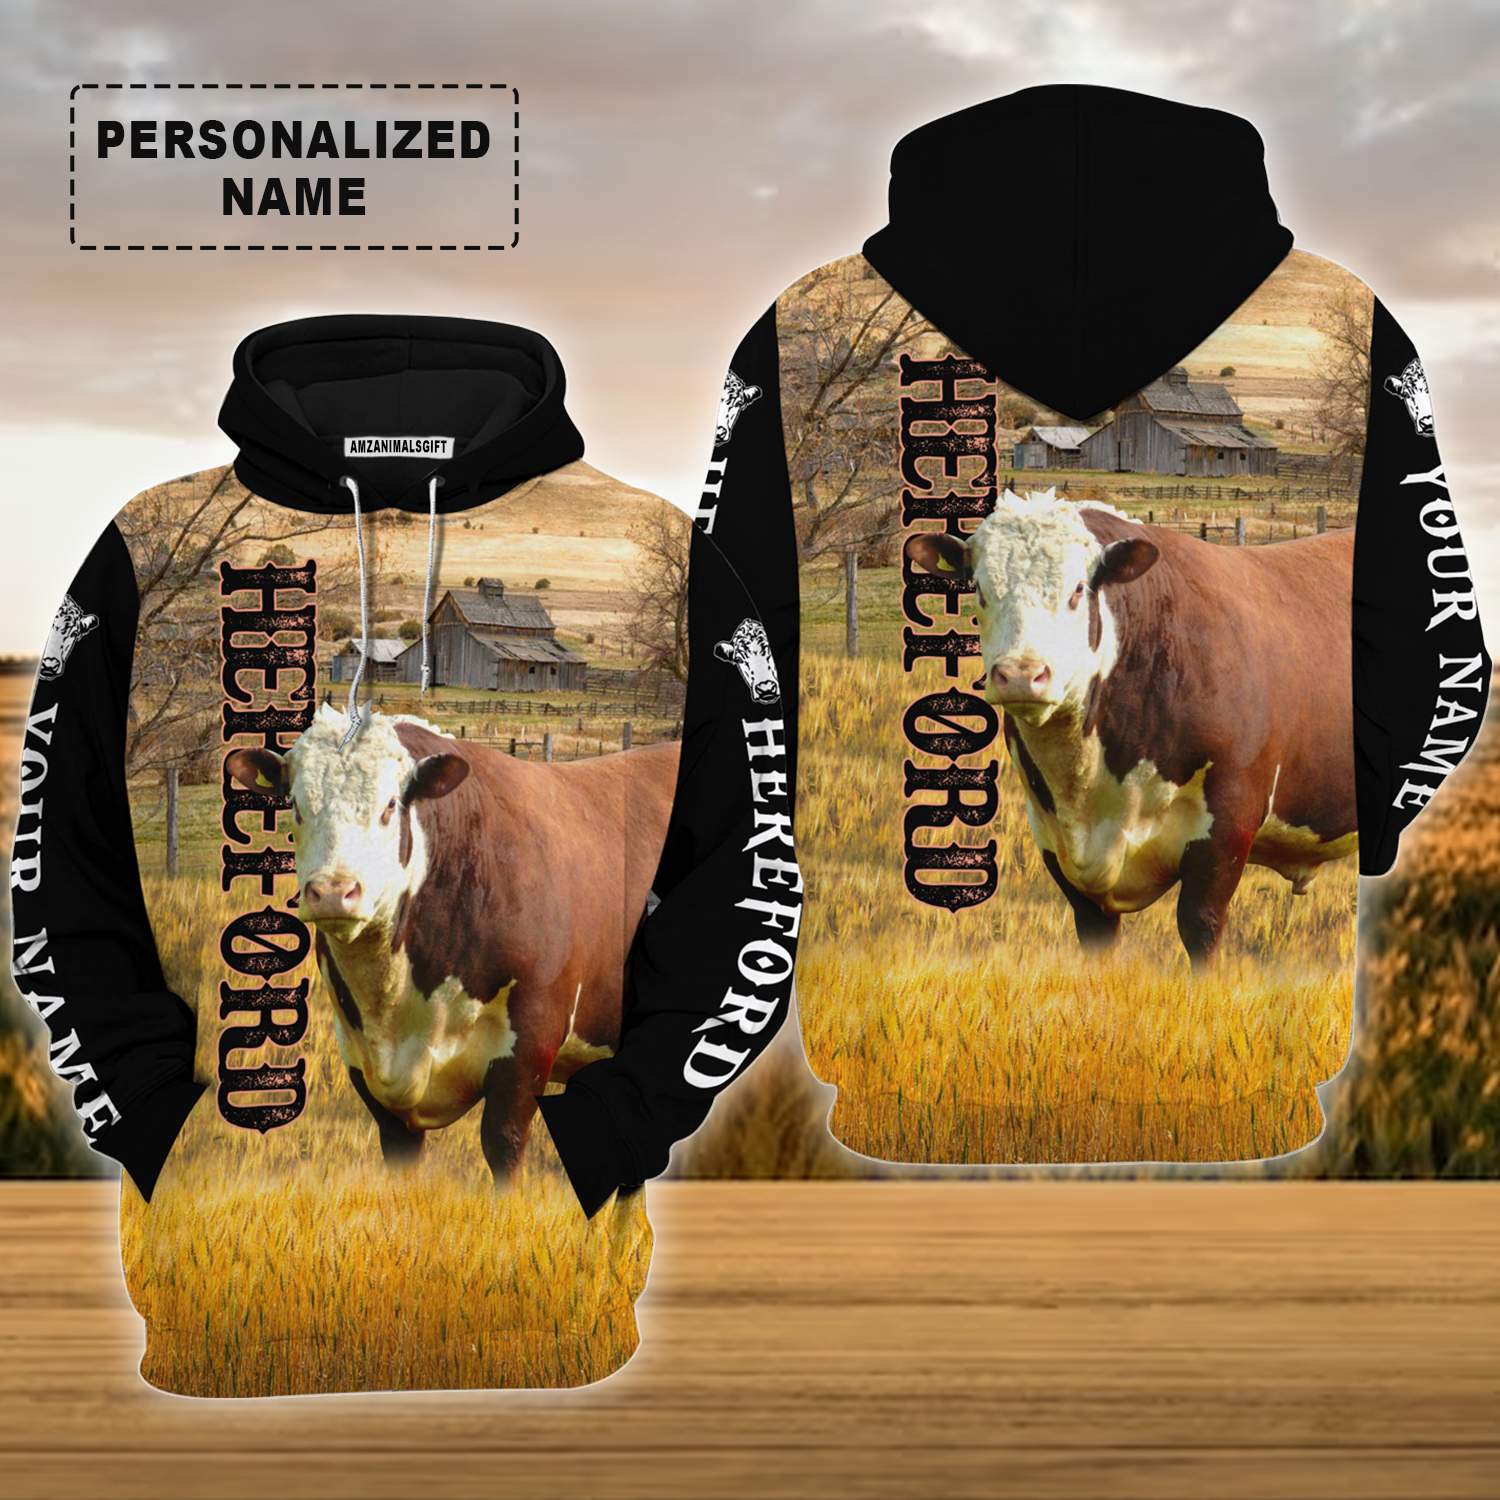 Personalized Hereford Cattle Hoodie, Hereford On The Farm Hoodie For Friend, Family, Farmer, Hereford Cattle Lovers